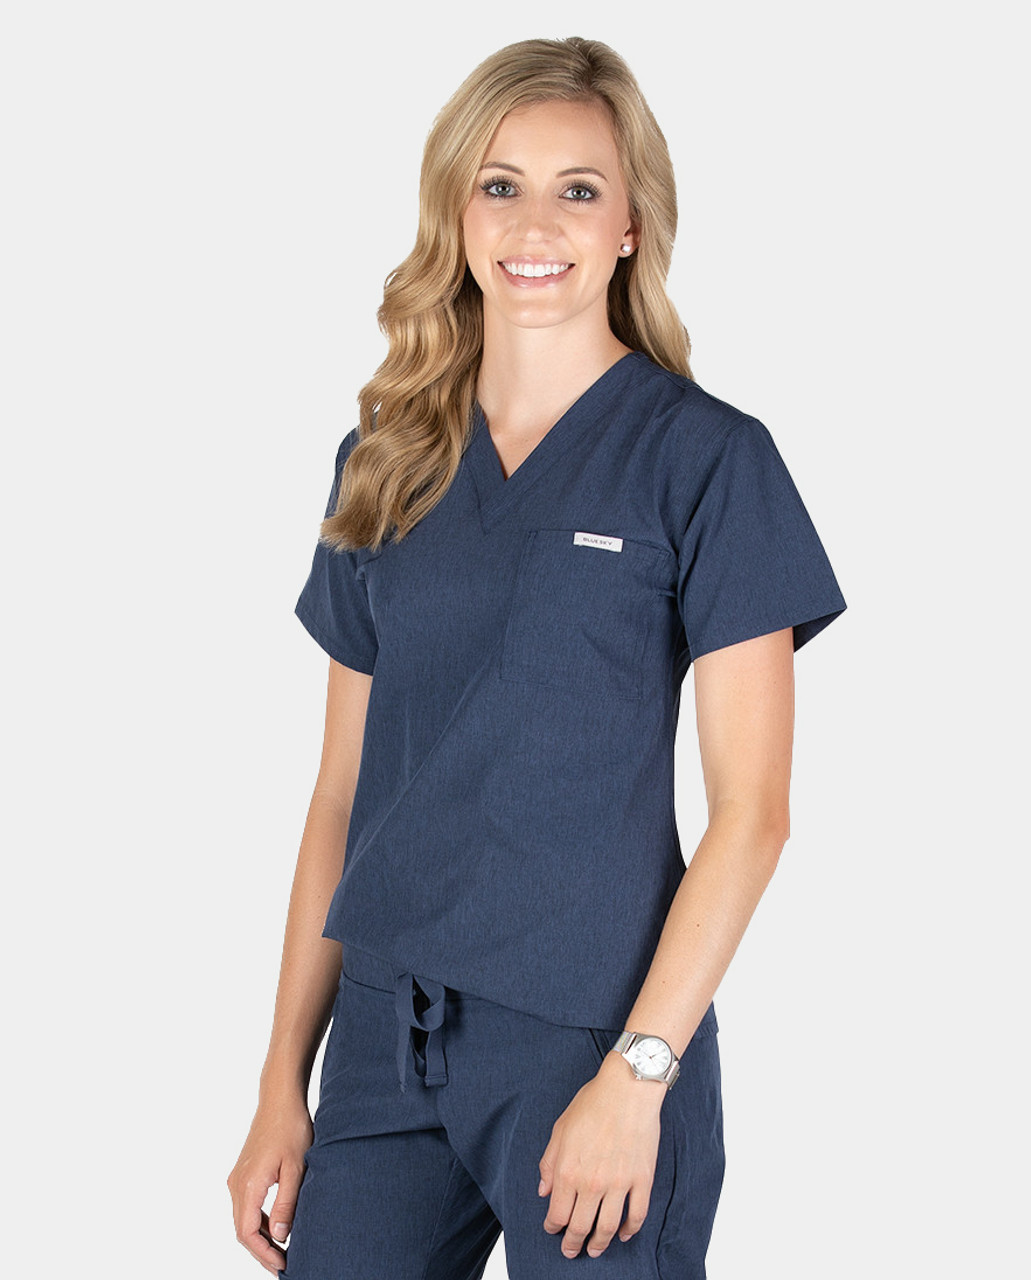 Blue Sky Scrubs: Lightweight and Breathable - Women's Scrubs - Blue Sky  Scrubs